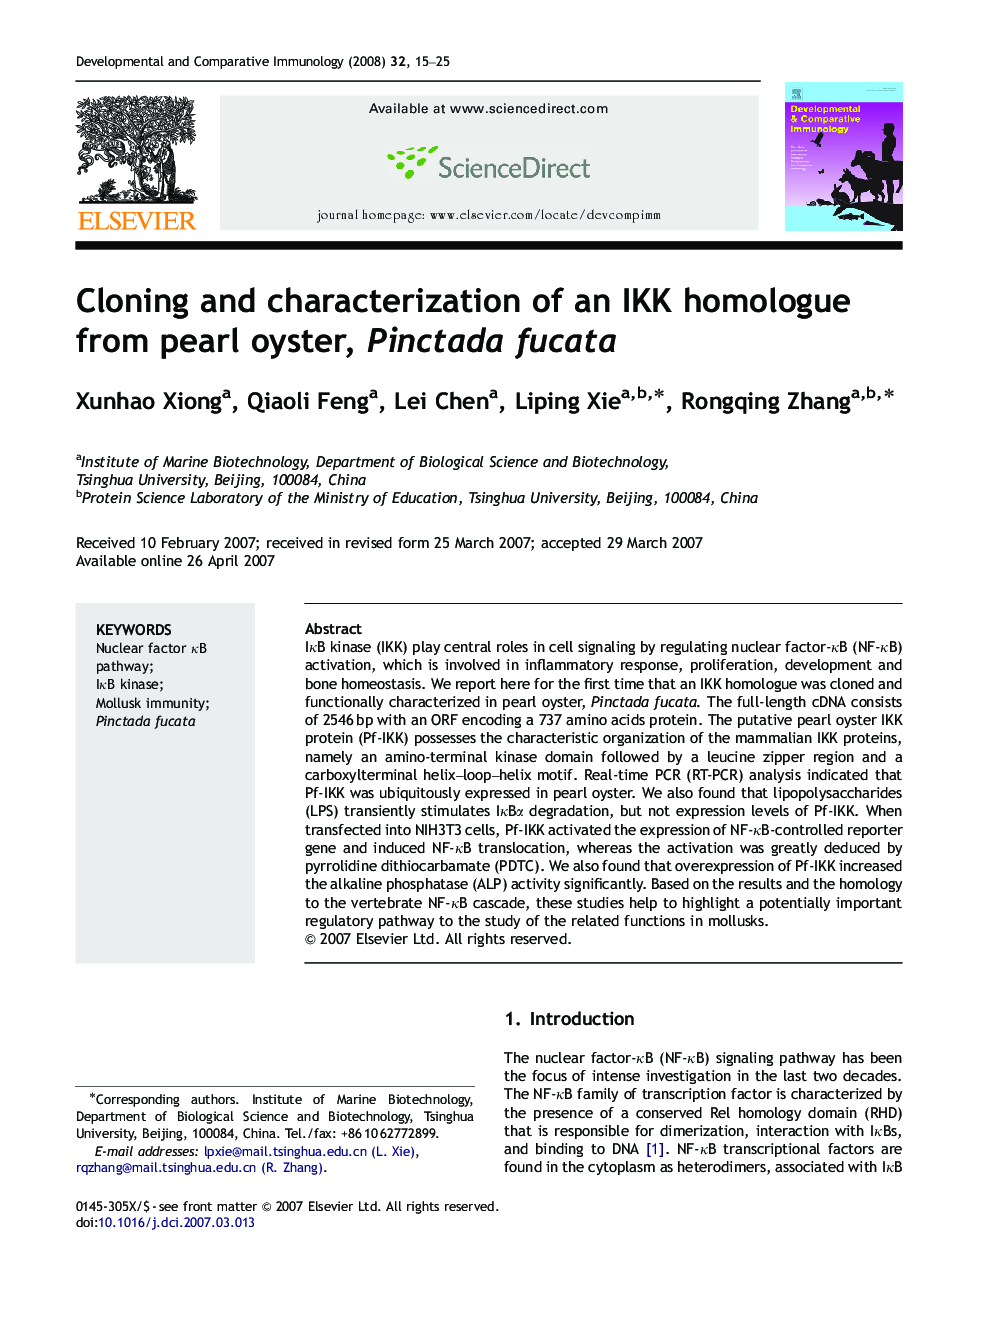 Cloning and characterization of an IKK homologue from pearl oyster, Pinctada fucata